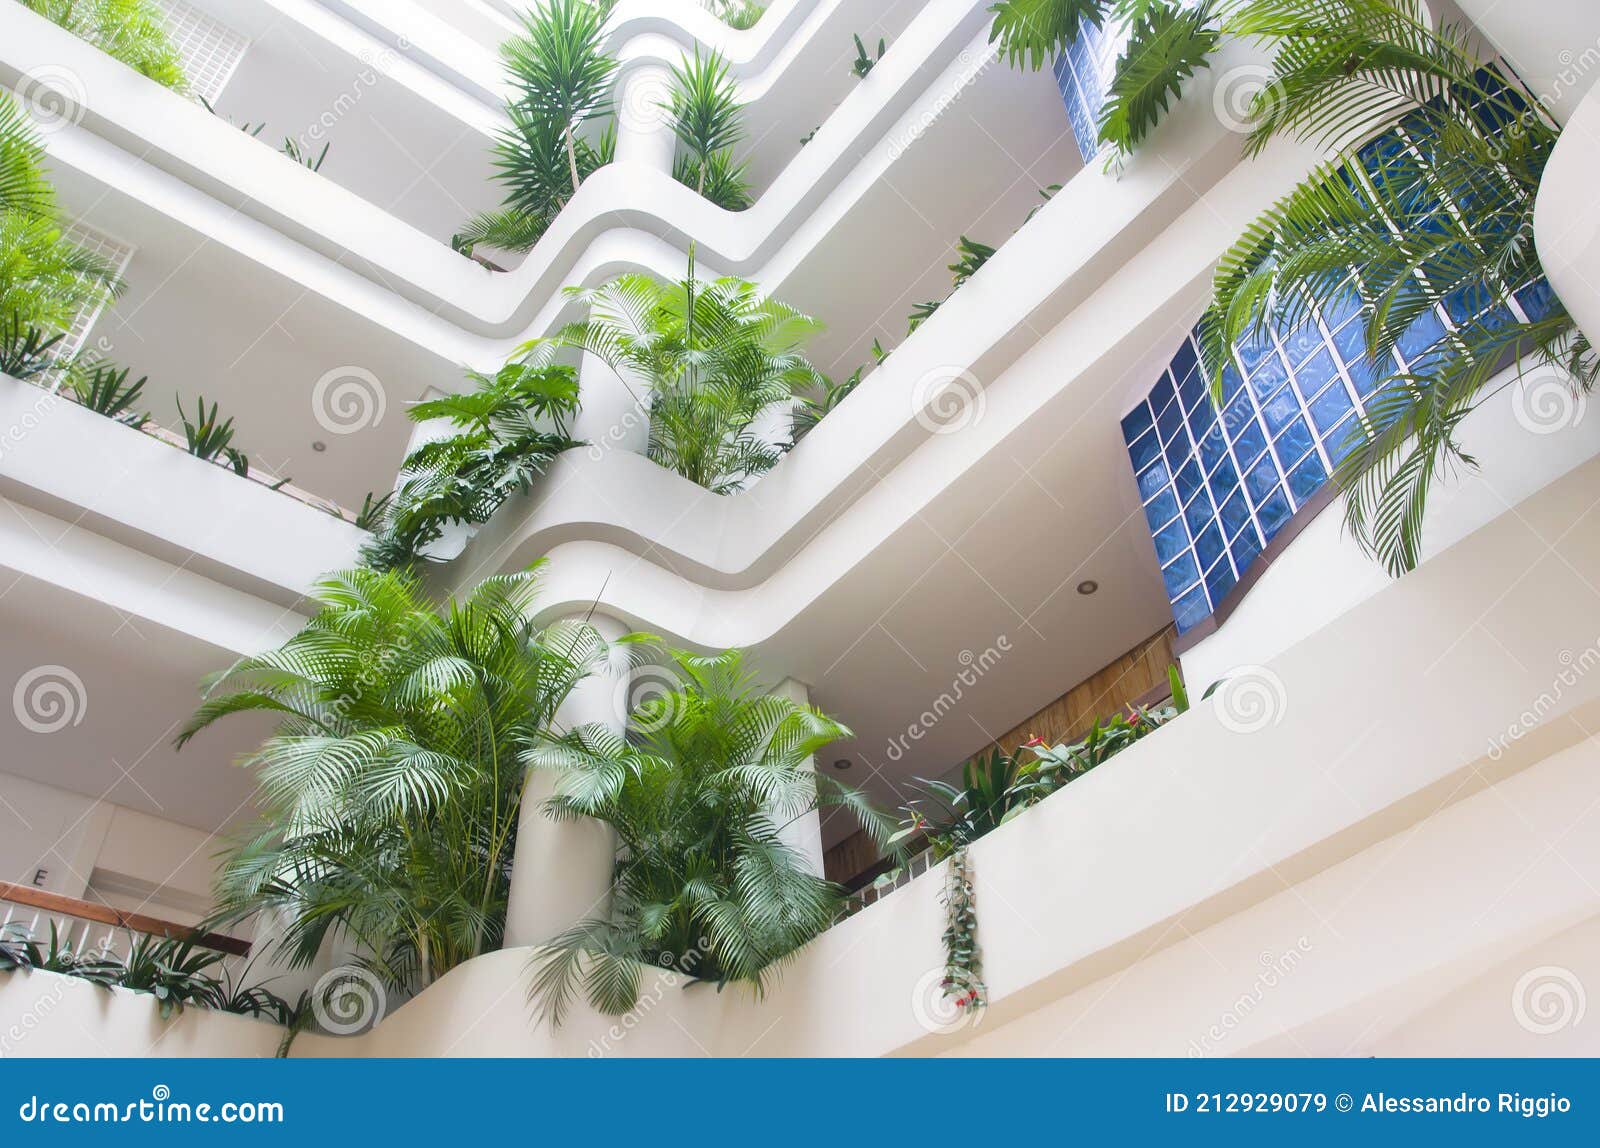 modern interior building with luxuriant green plants